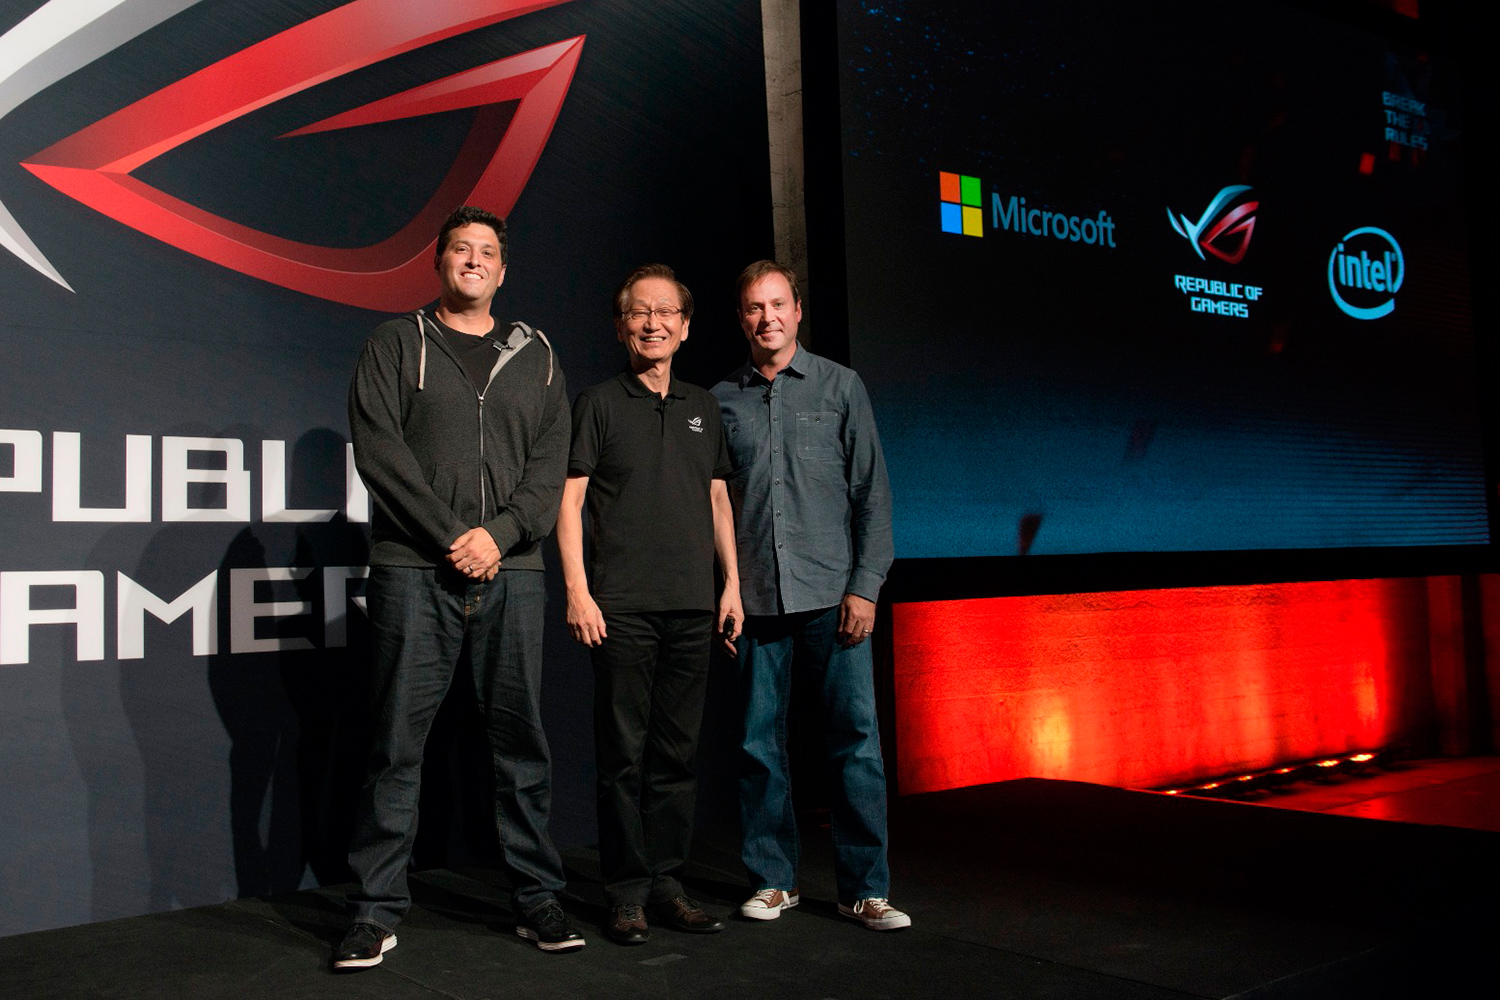 asus republic of gamers unleashed chairman jonney shih is joined on stage by microsoft executive vp terry myerson